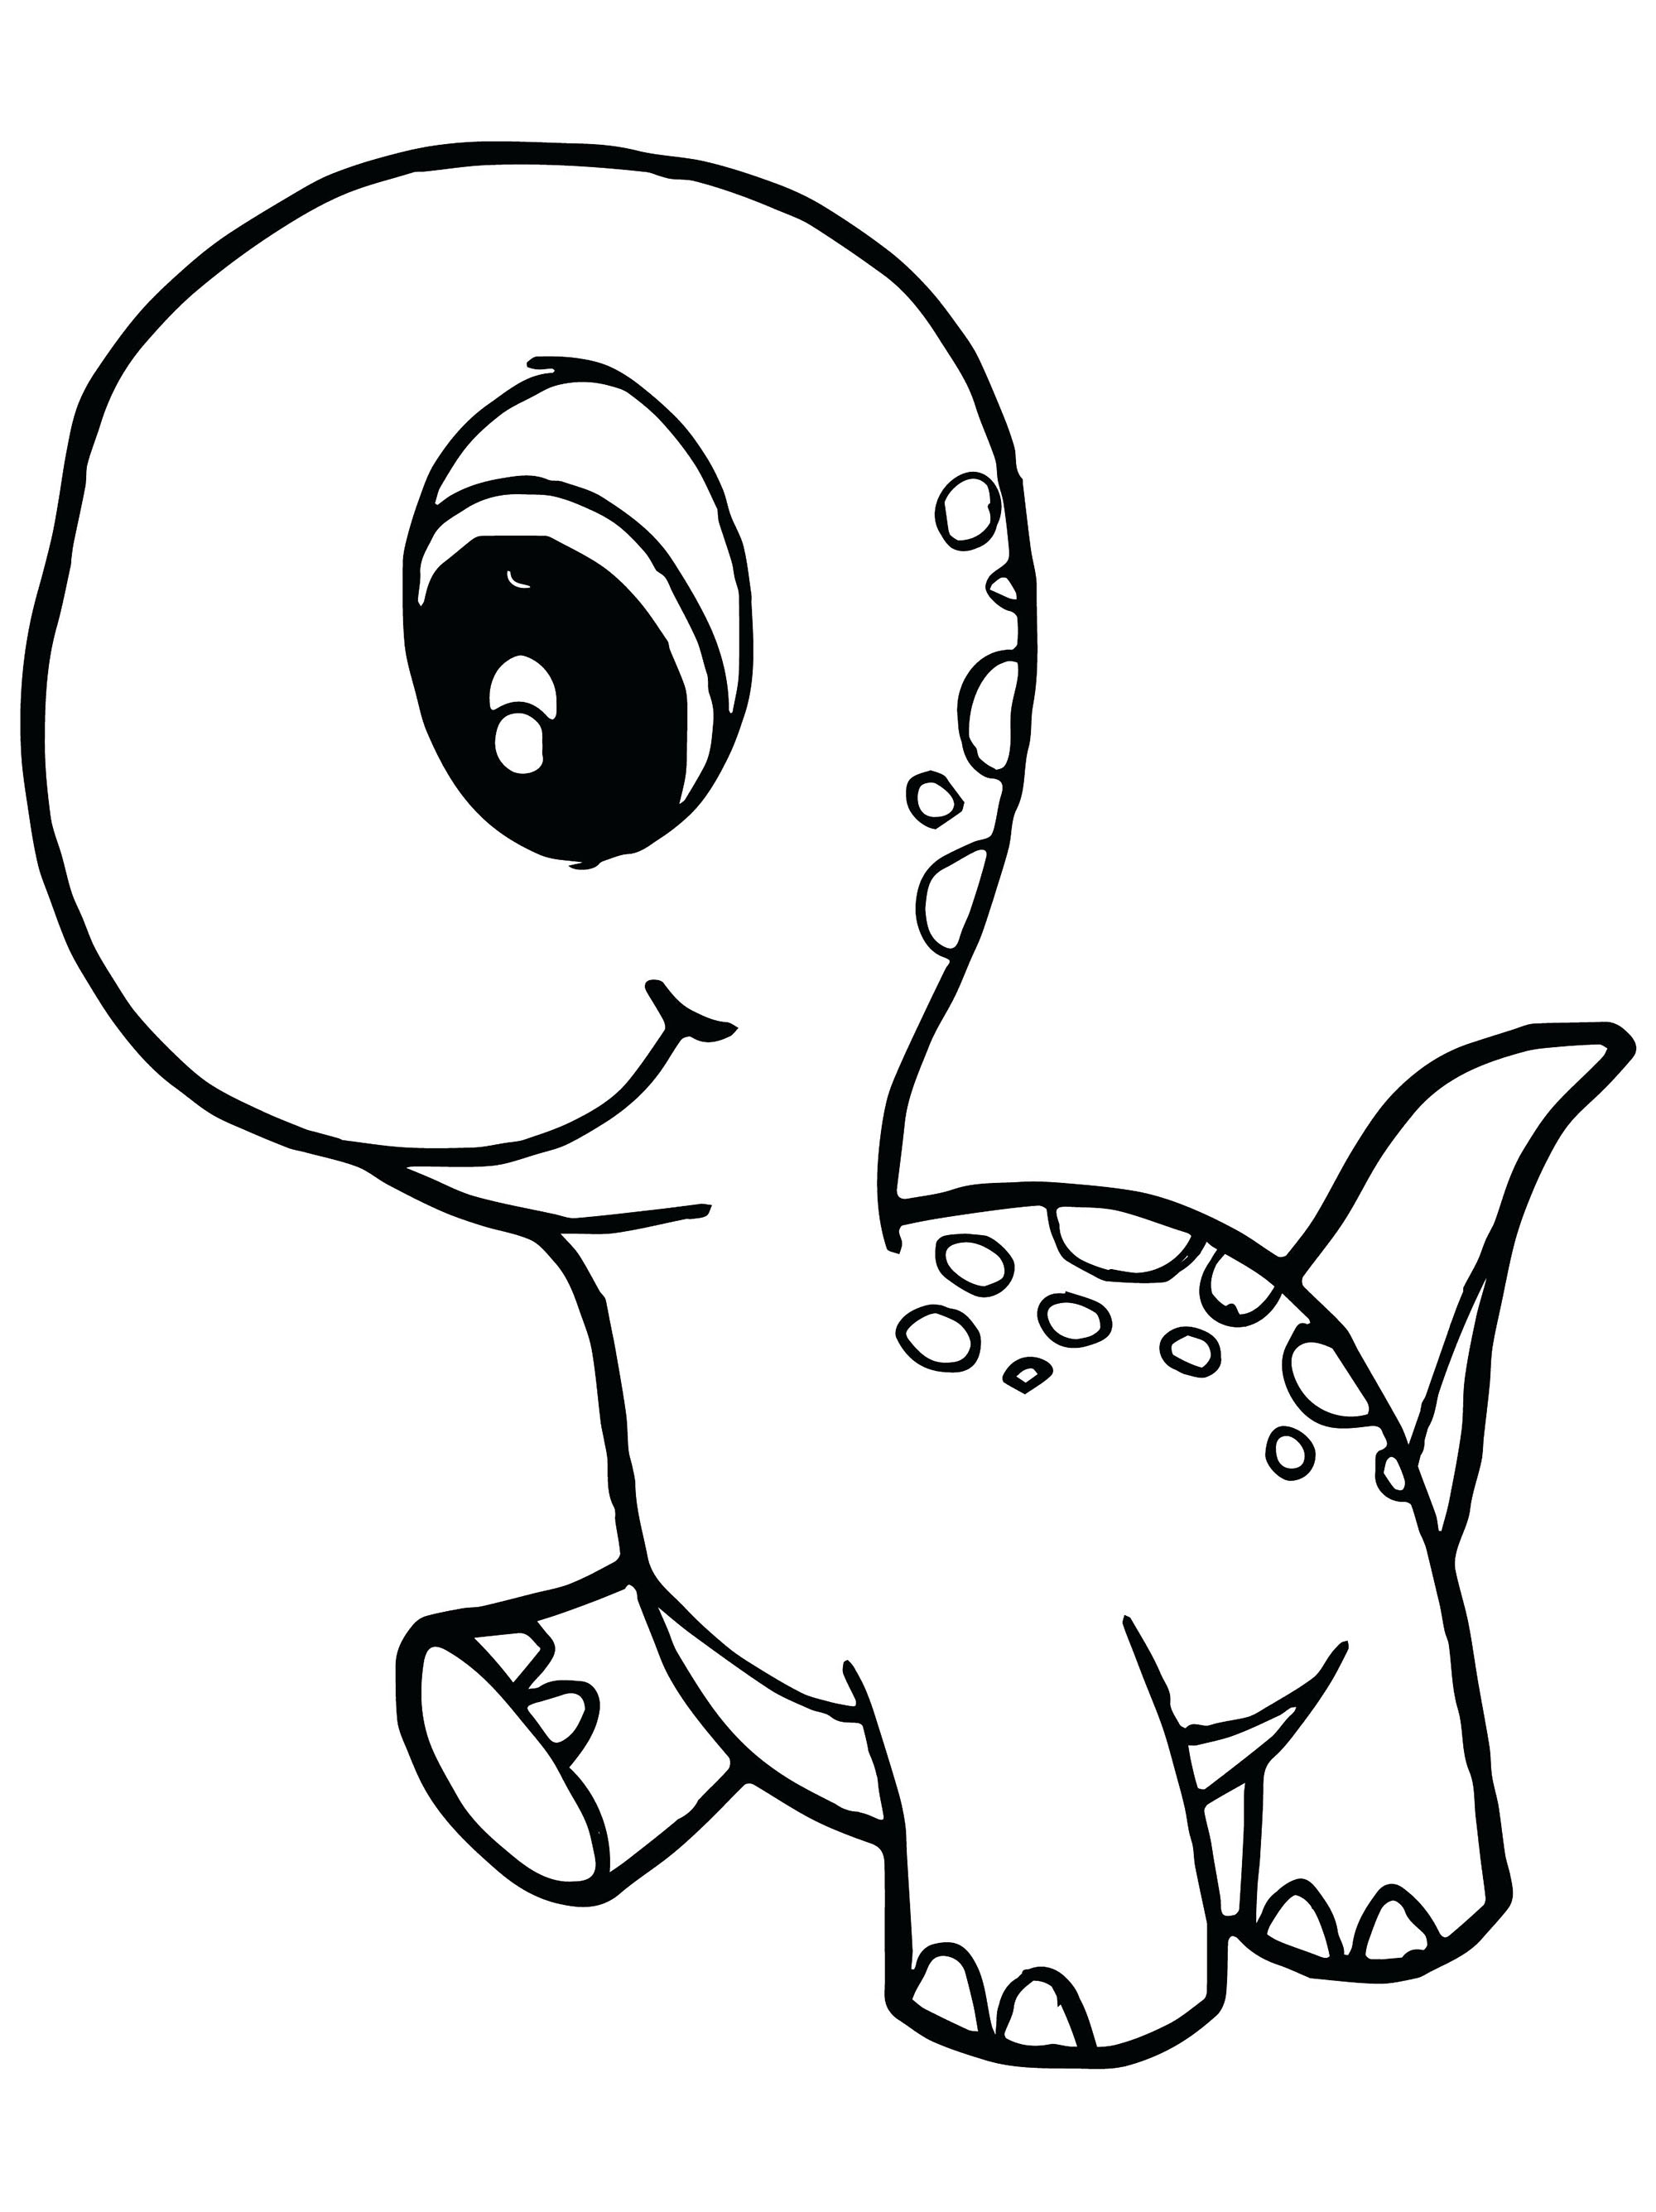 Printable baby dinasour Coloring Page for kids.